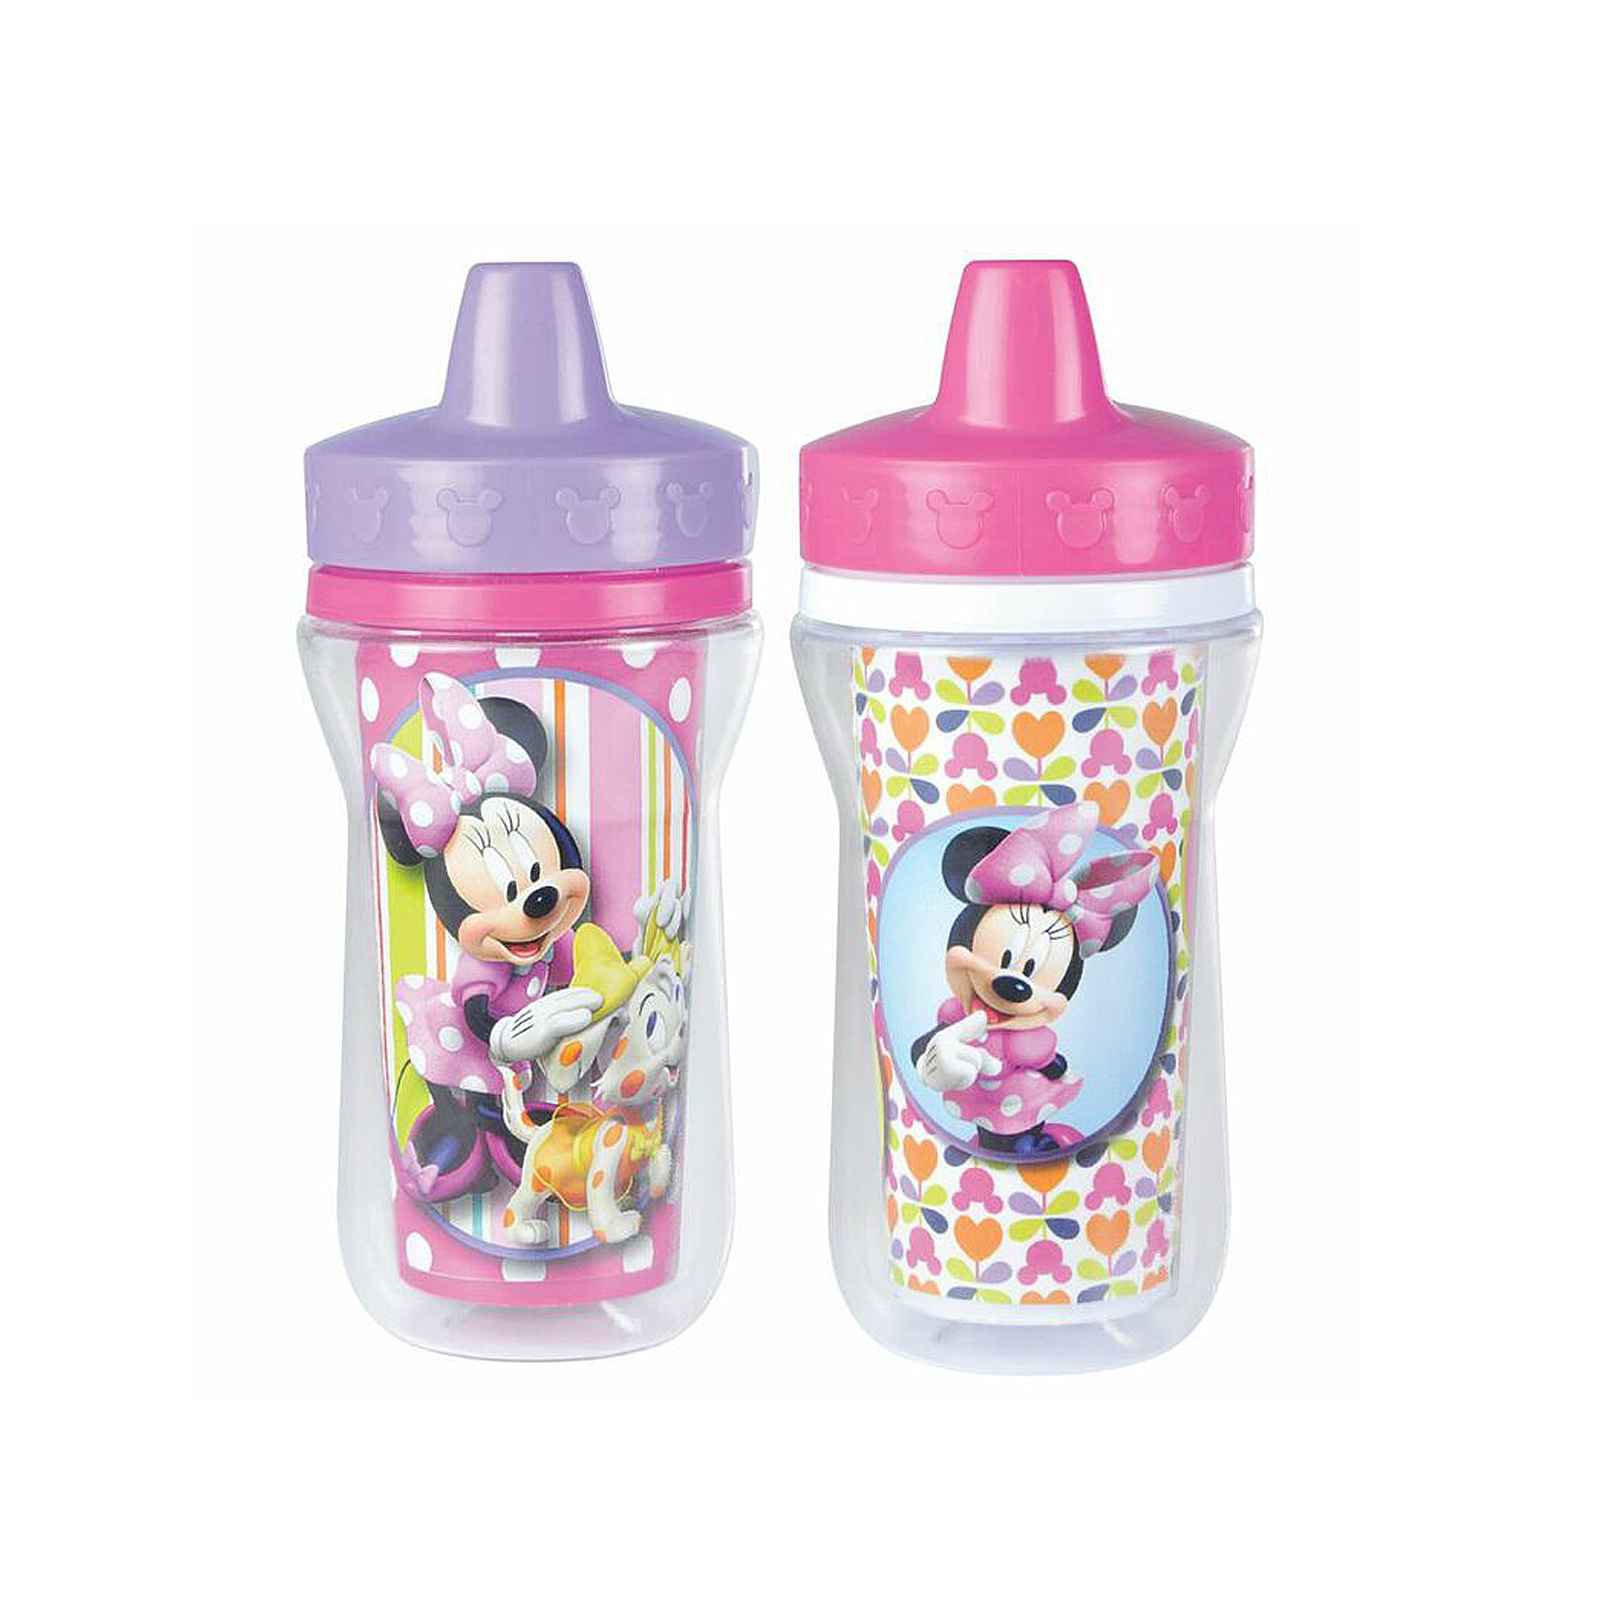 0071463103409 - MINNIE MOUSE 2-PK. INSULATED SIPPY CUPS